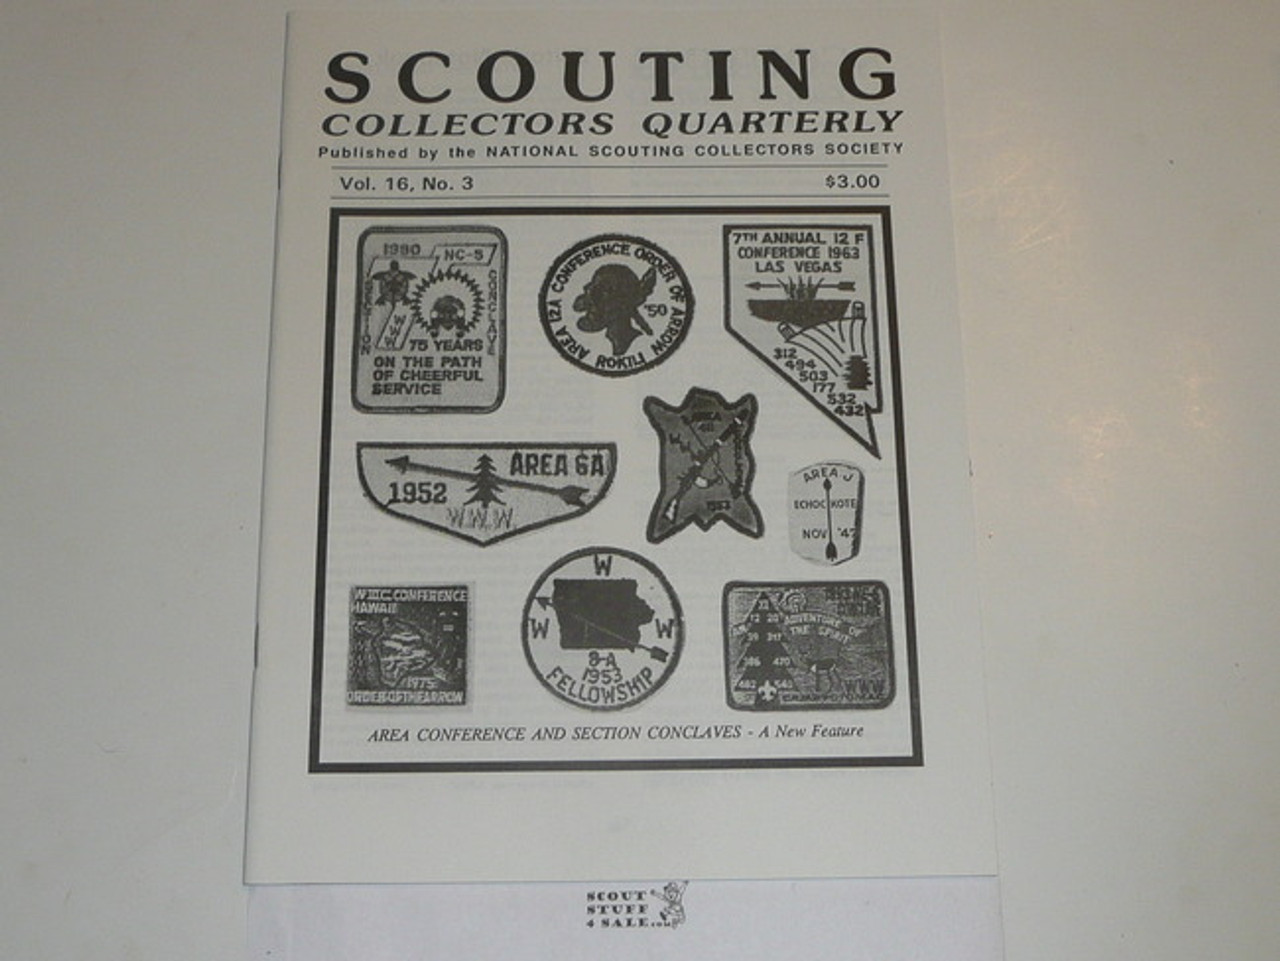 Scouting Collecters Quarterly Newsletter, Vol 16 #3